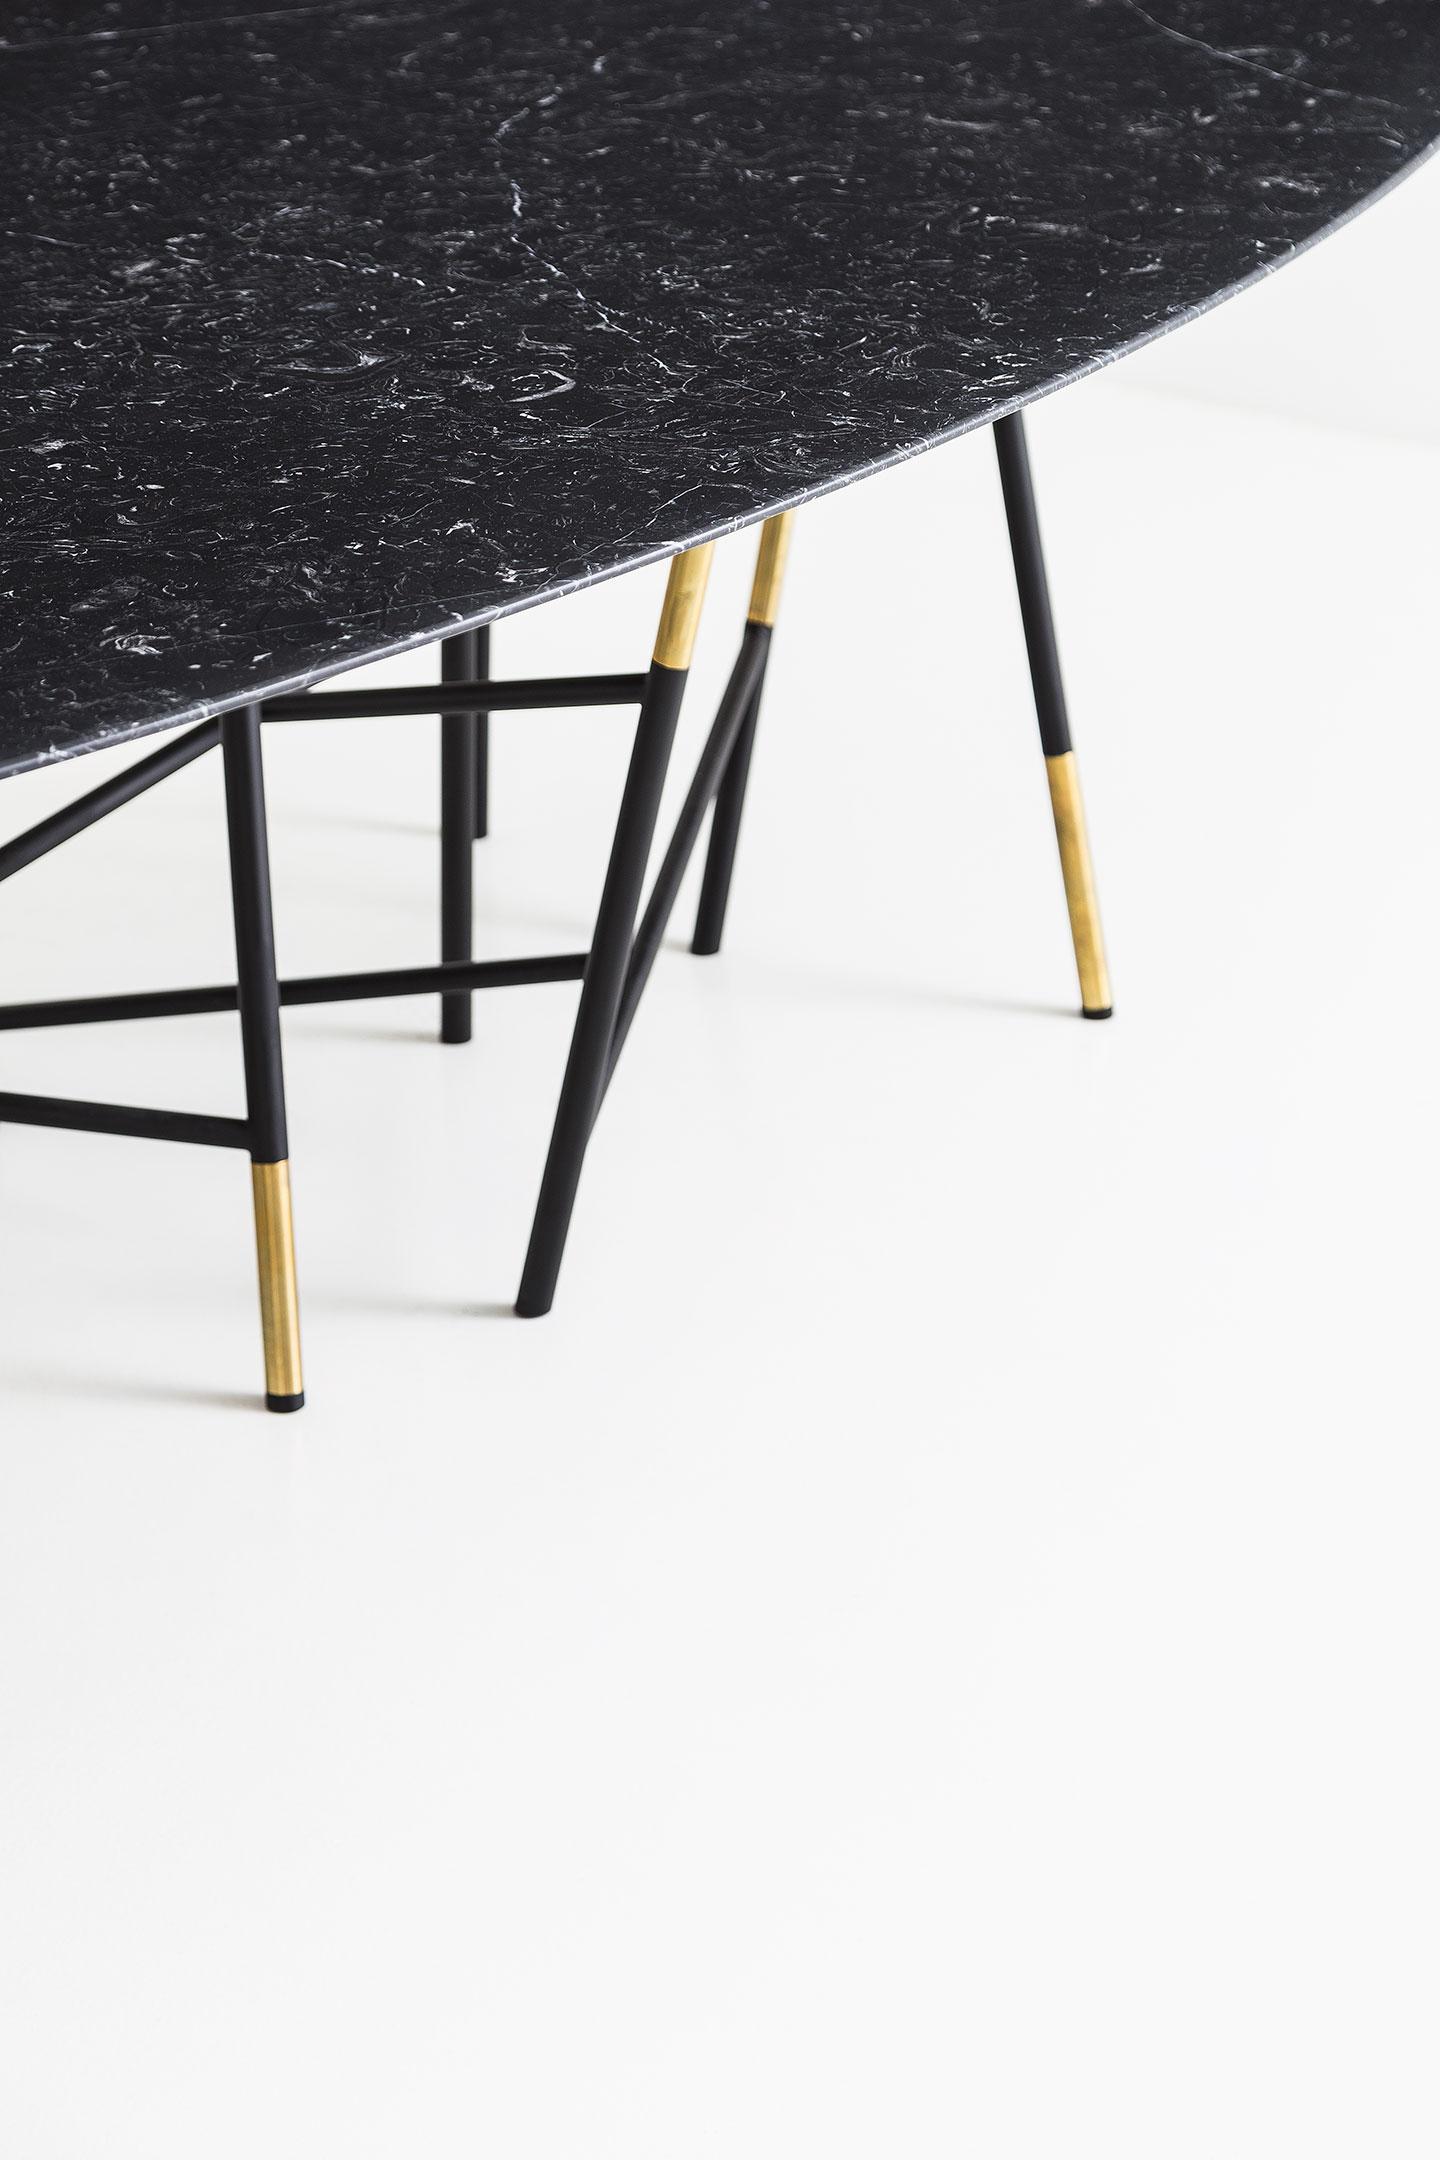 Tavolo 063 Table in Painted Metal and Brass with Marble Top
Elliptical table with structure in matte black painted metal and polished brass inserts. Black Marquina marble top with tapered edge.
Progetto Non Finito collection.